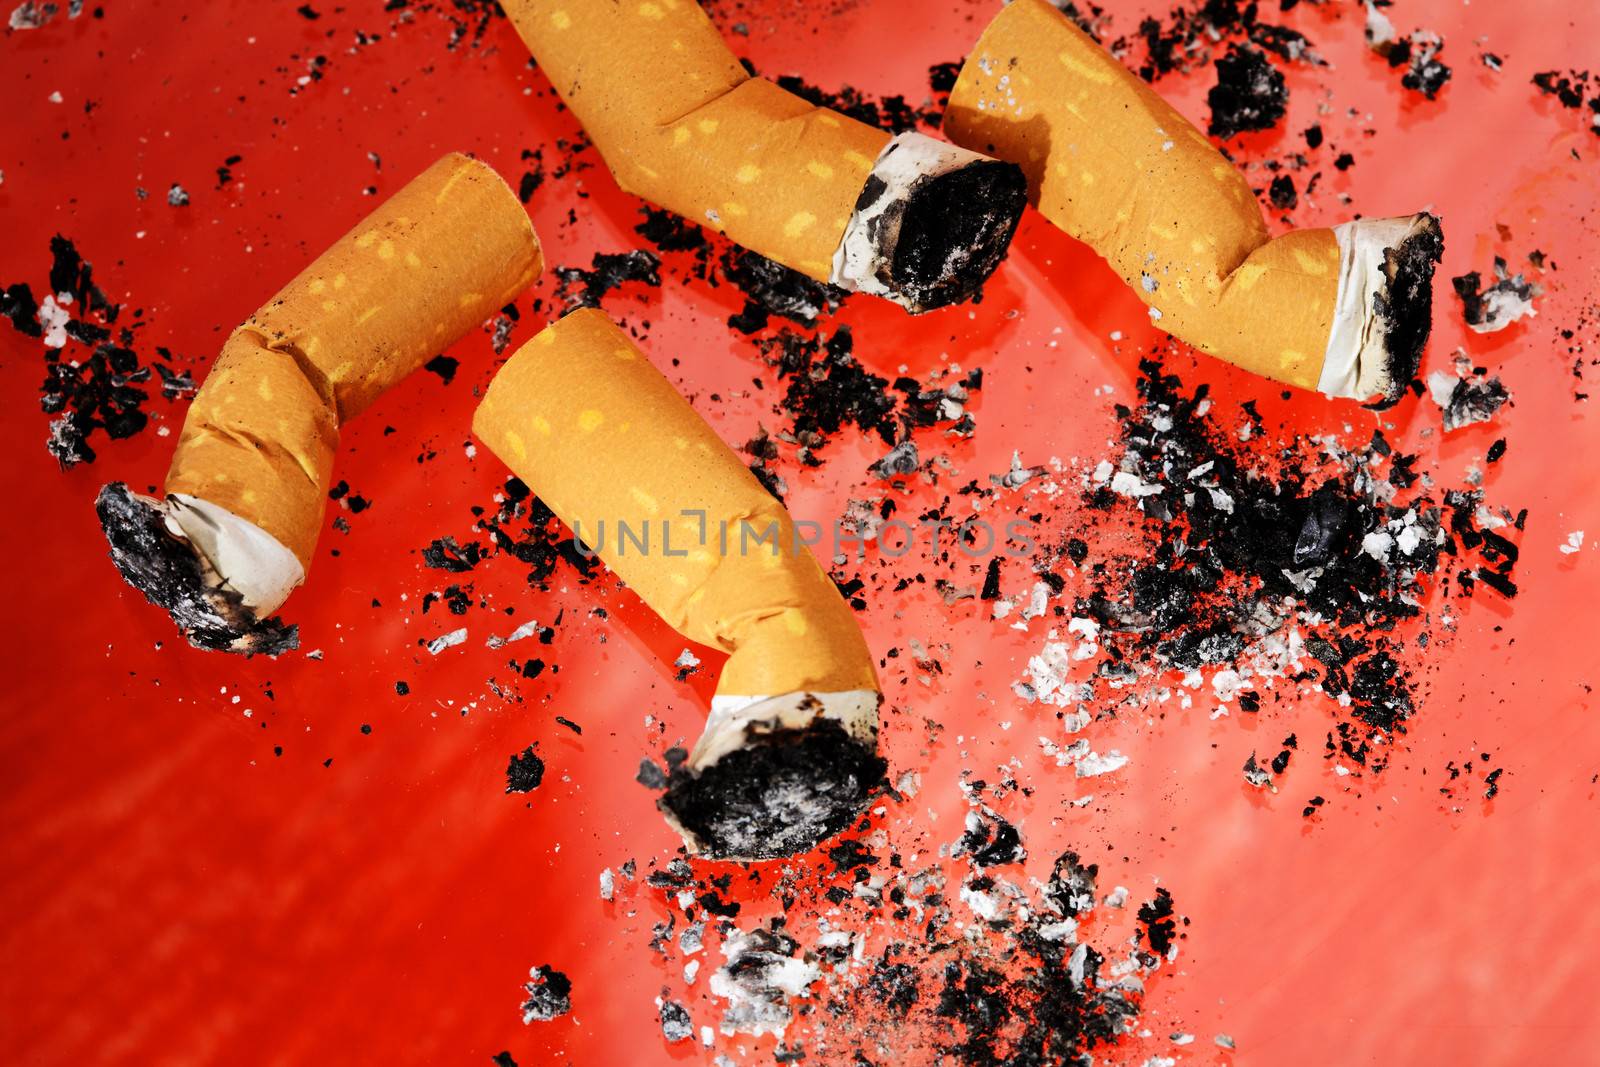 Cigarette Butts by Stocksnapper